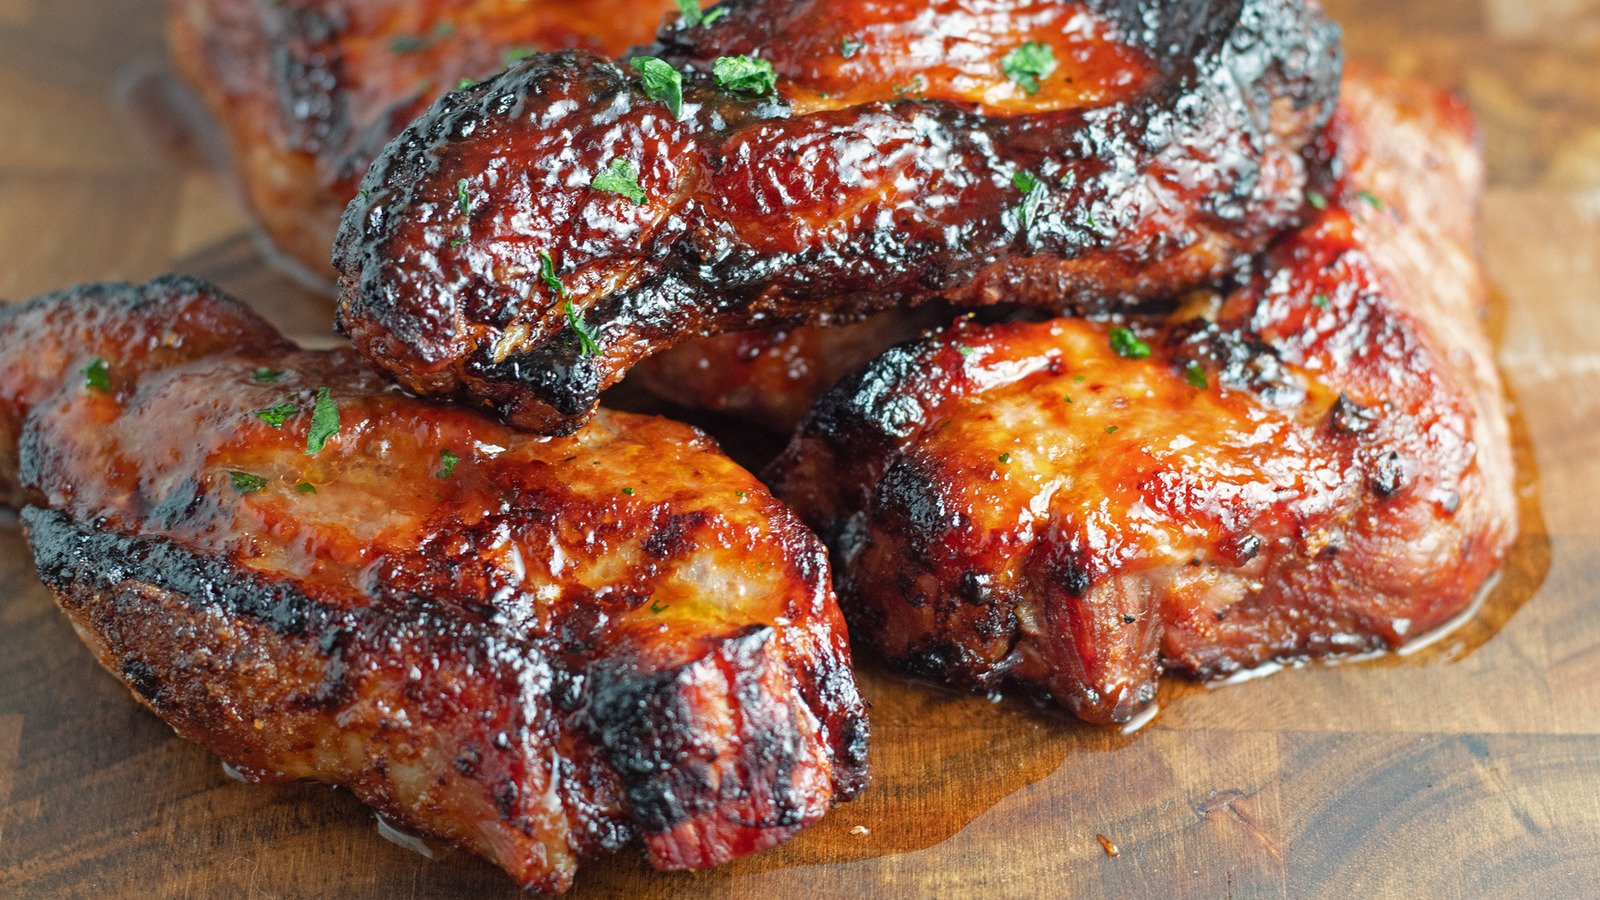 Angela Latimer Fans Will Love This Air Fryer Country-Style Ribs Recipe